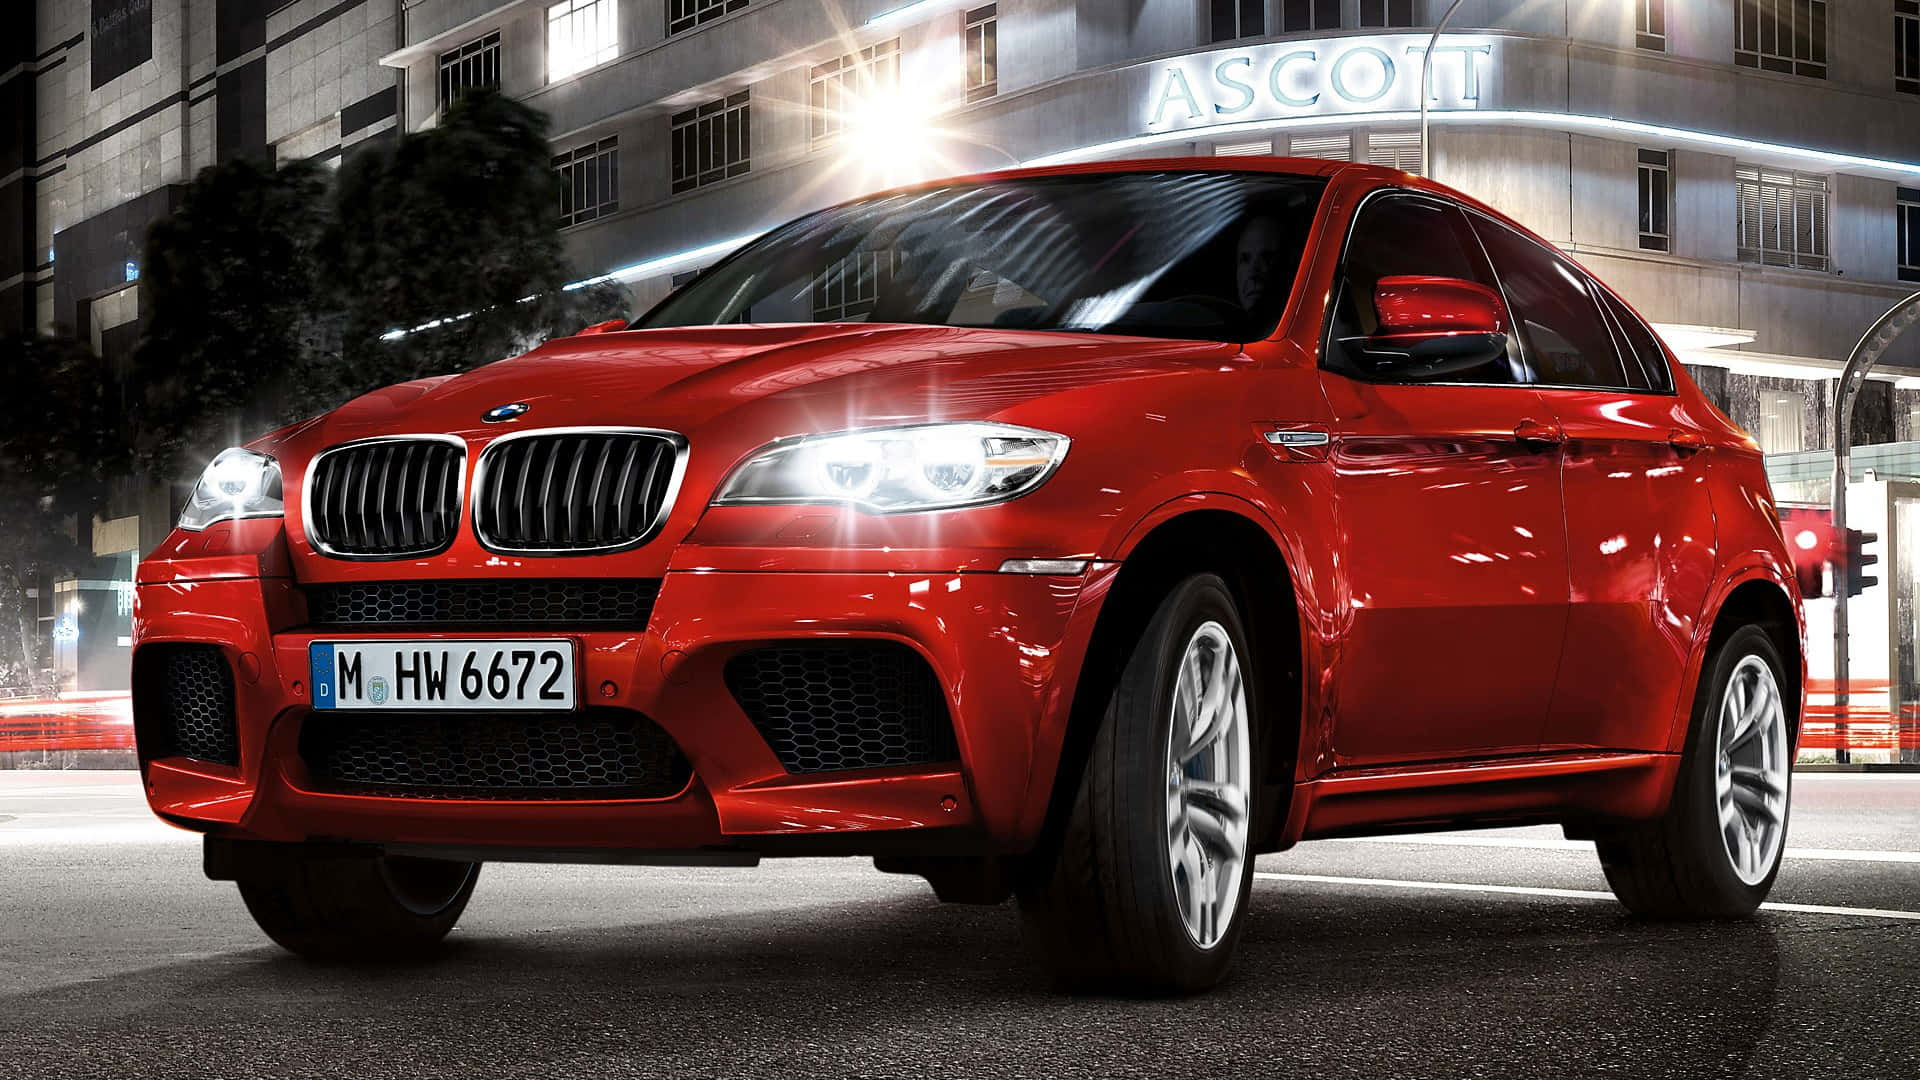 "Whether you're looking for power or luxury, the BMW X6 M can offer it all."